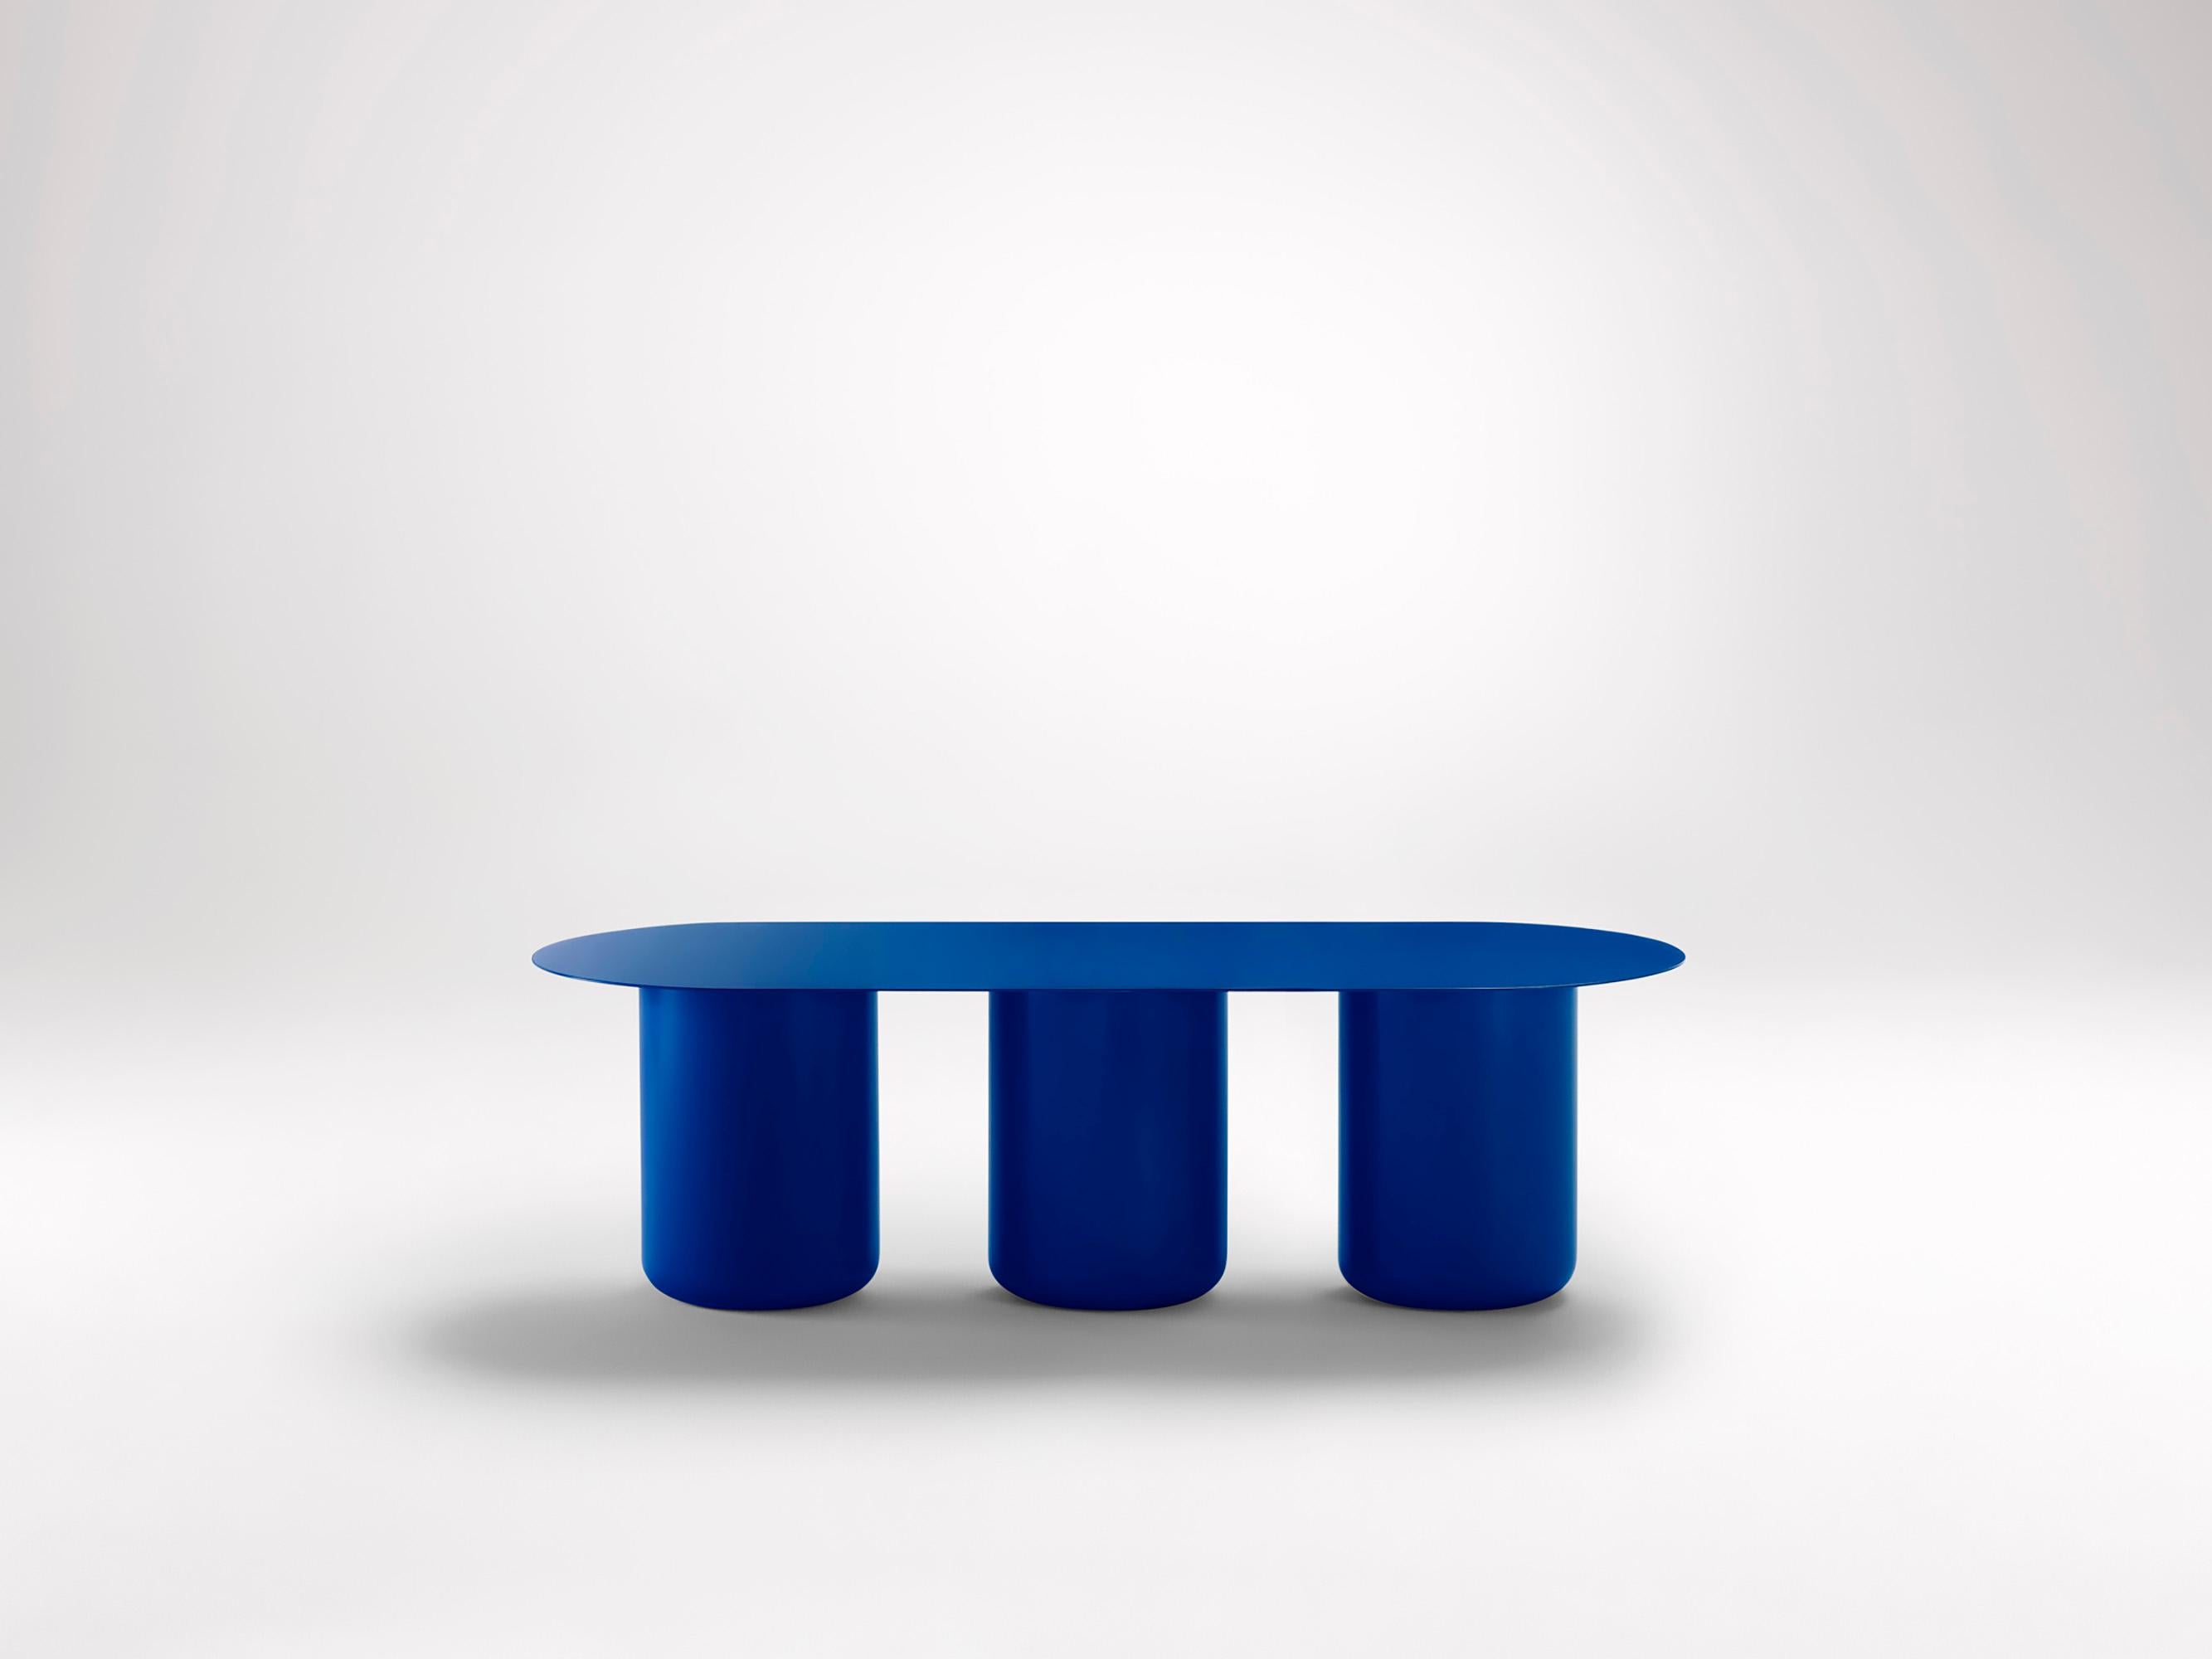 Vivid Blue Table 03 by Coco Flip
Dimensions: D 48 / 122 x H 32 / 36 / 40 / 42 cm
Materials: Mild steel, powder-coated with zinc undercoat. 
Weight: 30 kg

Coco Flip is a Melbourne based furniture and lighting design studio, run by us, Kate Stokes